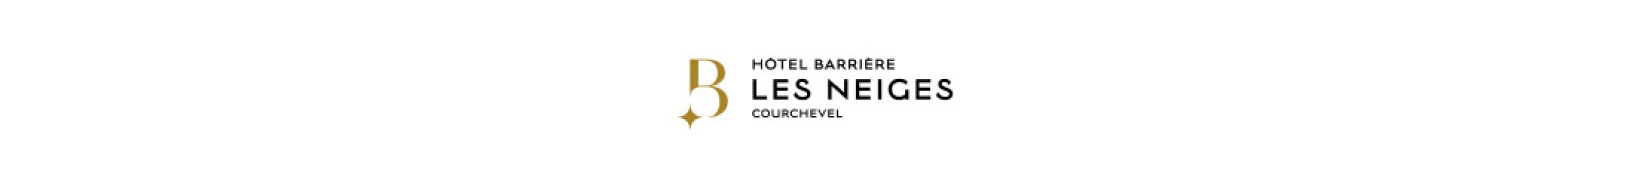 hotel-les-neiges-barriere.jpg